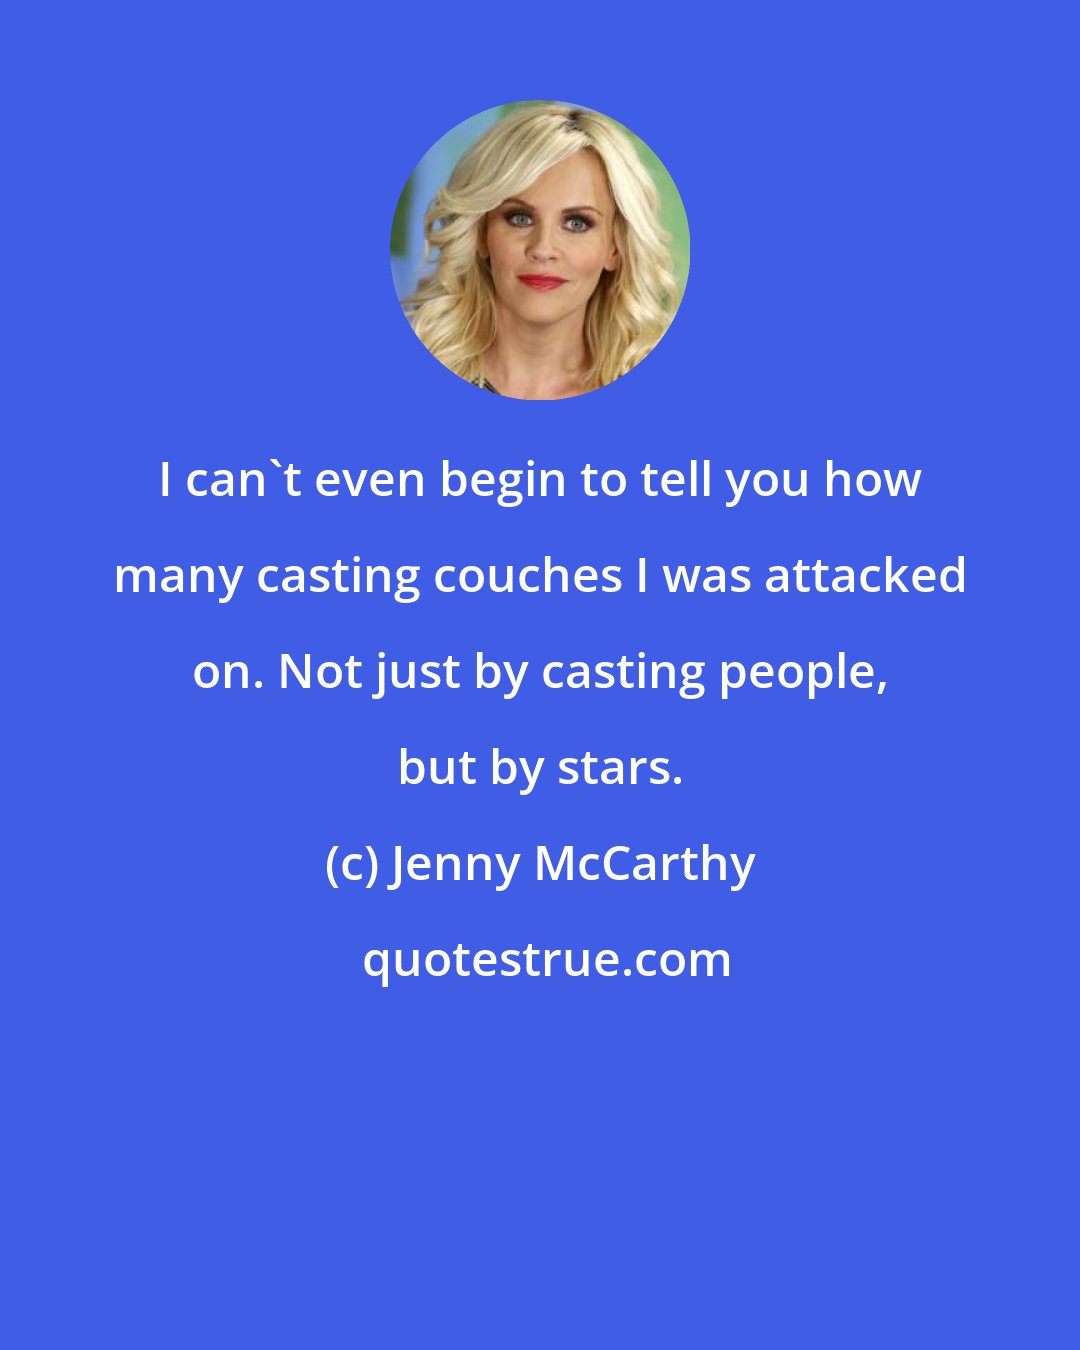 Jenny McCarthy: I can't even begin to tell you how many casting couches I was attacked on. Not just by casting people, but by stars.